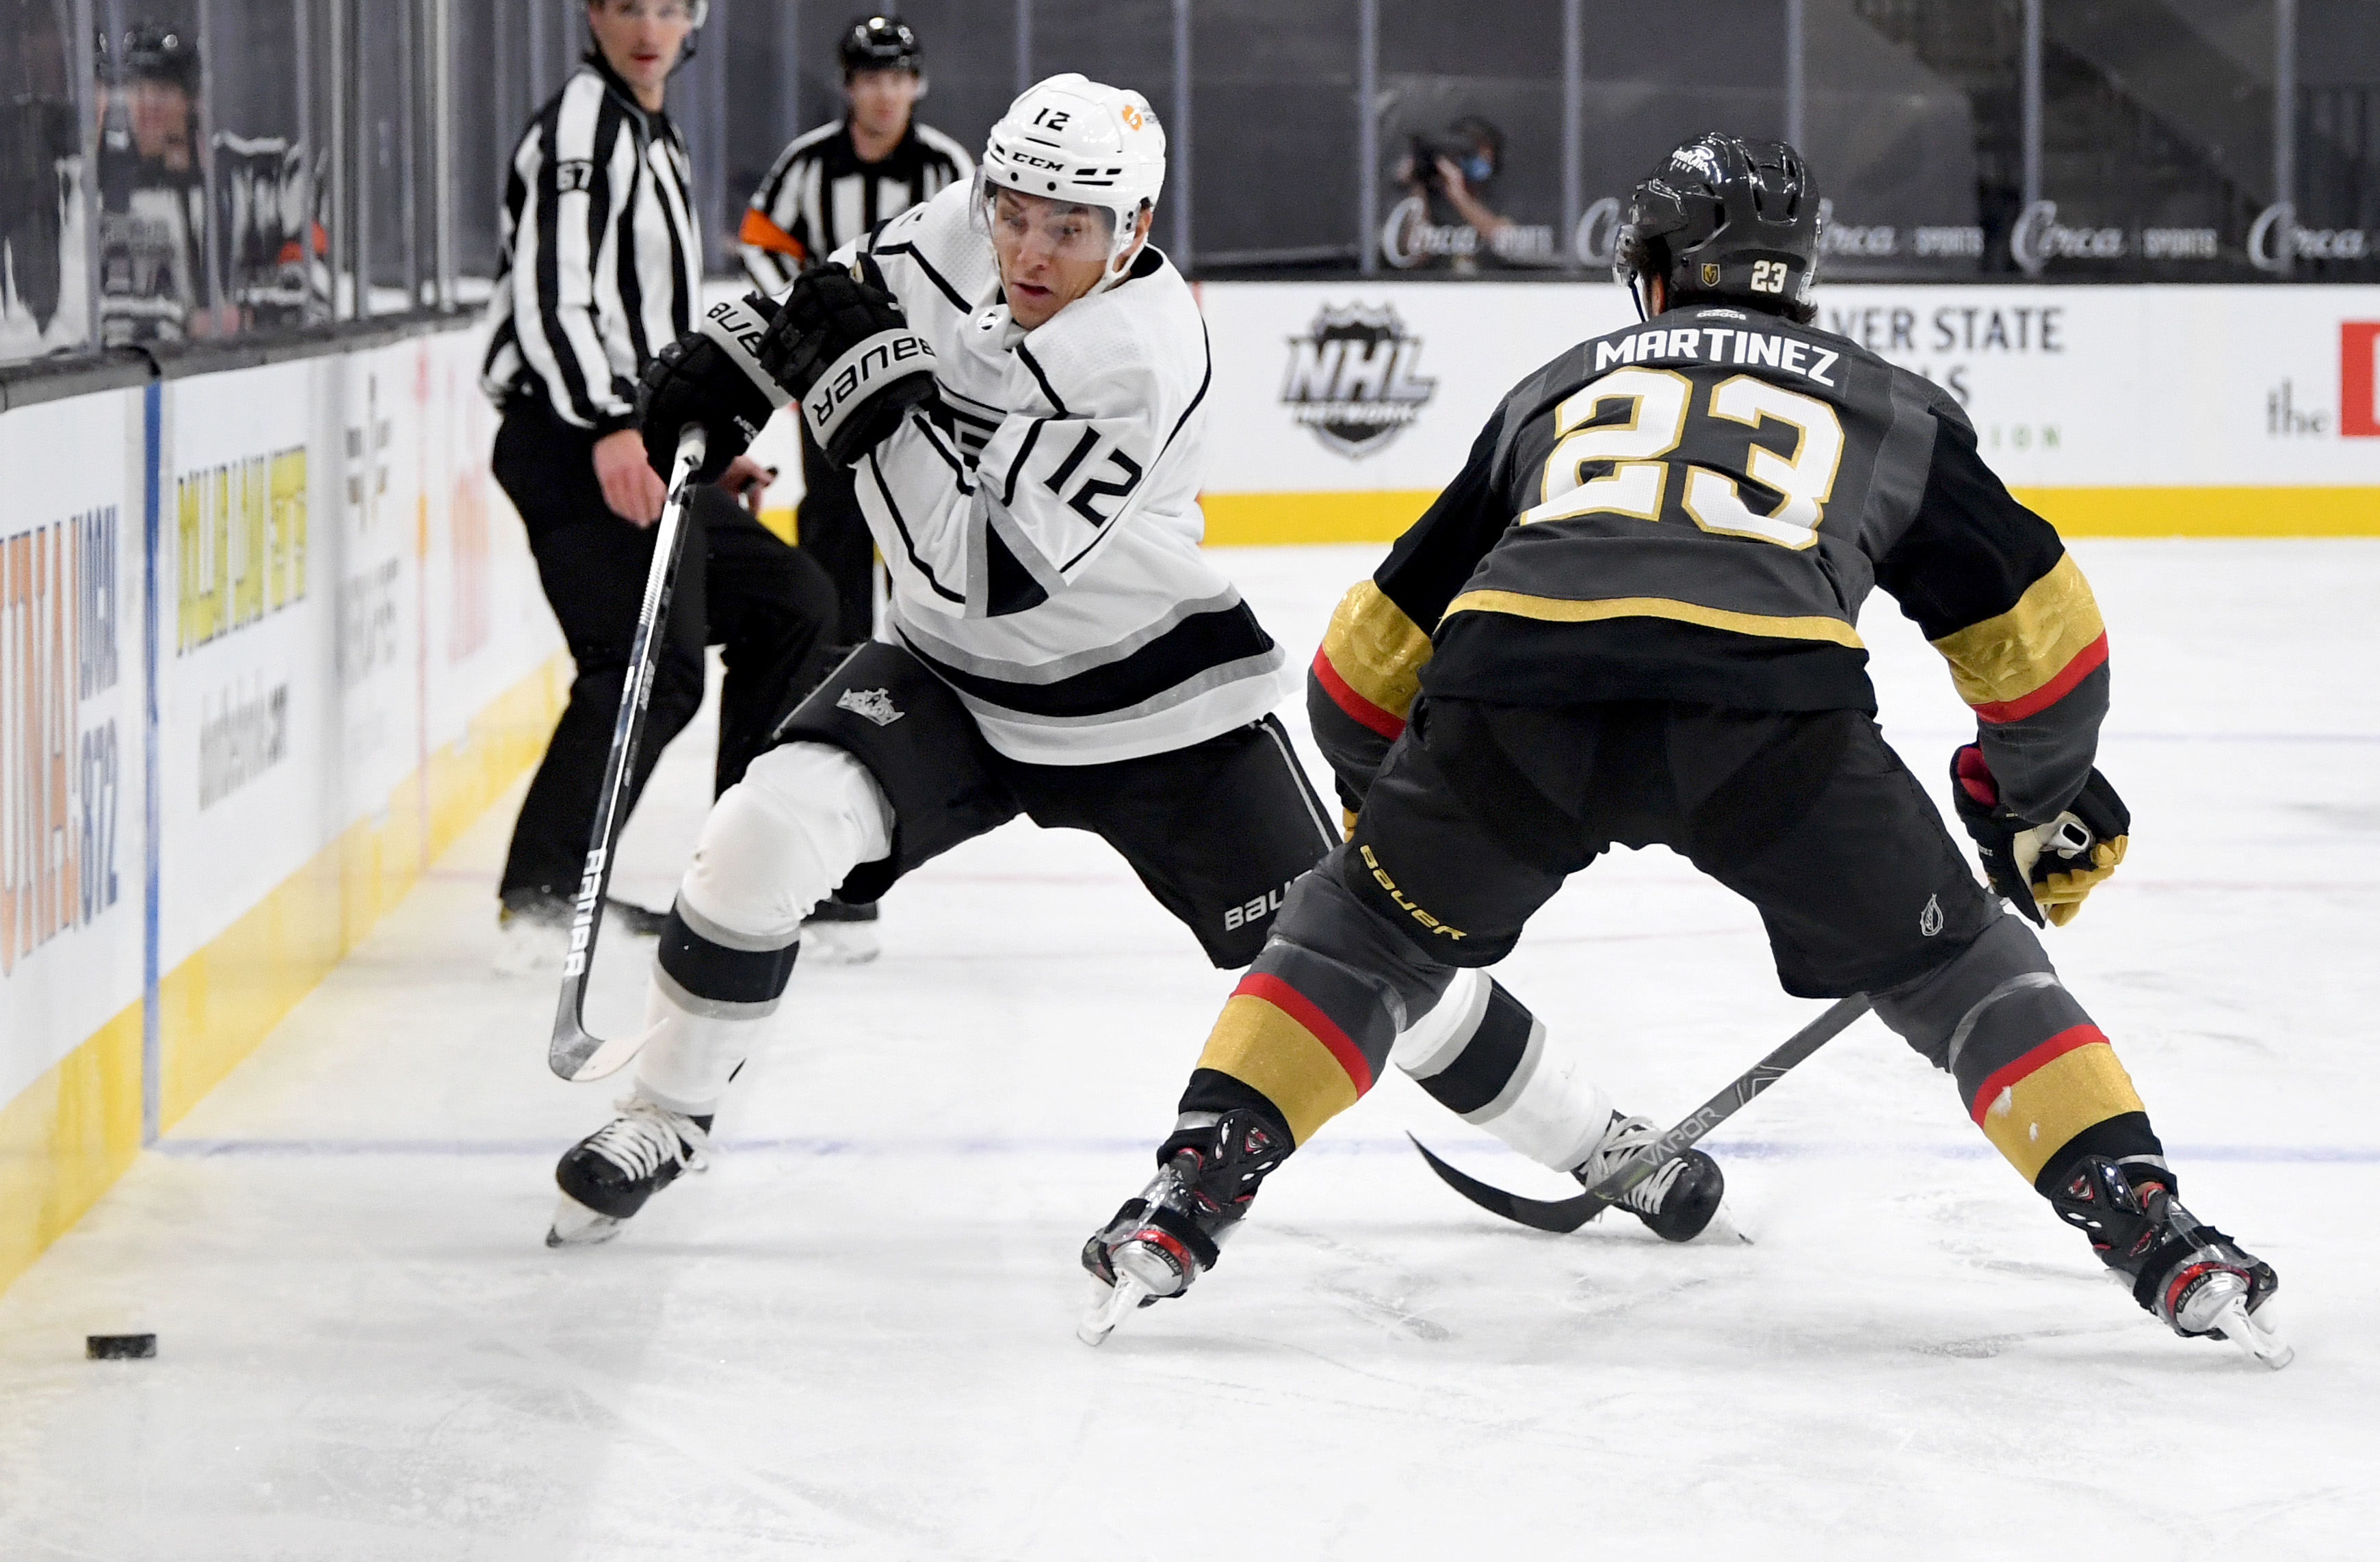 Trevor Moore #12 of the Los Angeles Kings tries to skate past Alec Martinez #23 of the Vegas Golden Knights in the first period of their game at T-Mobile Arena on February 5, 2021 in Las Vegas, Nevada. The Golden Knights defeated the Kings 5-2.